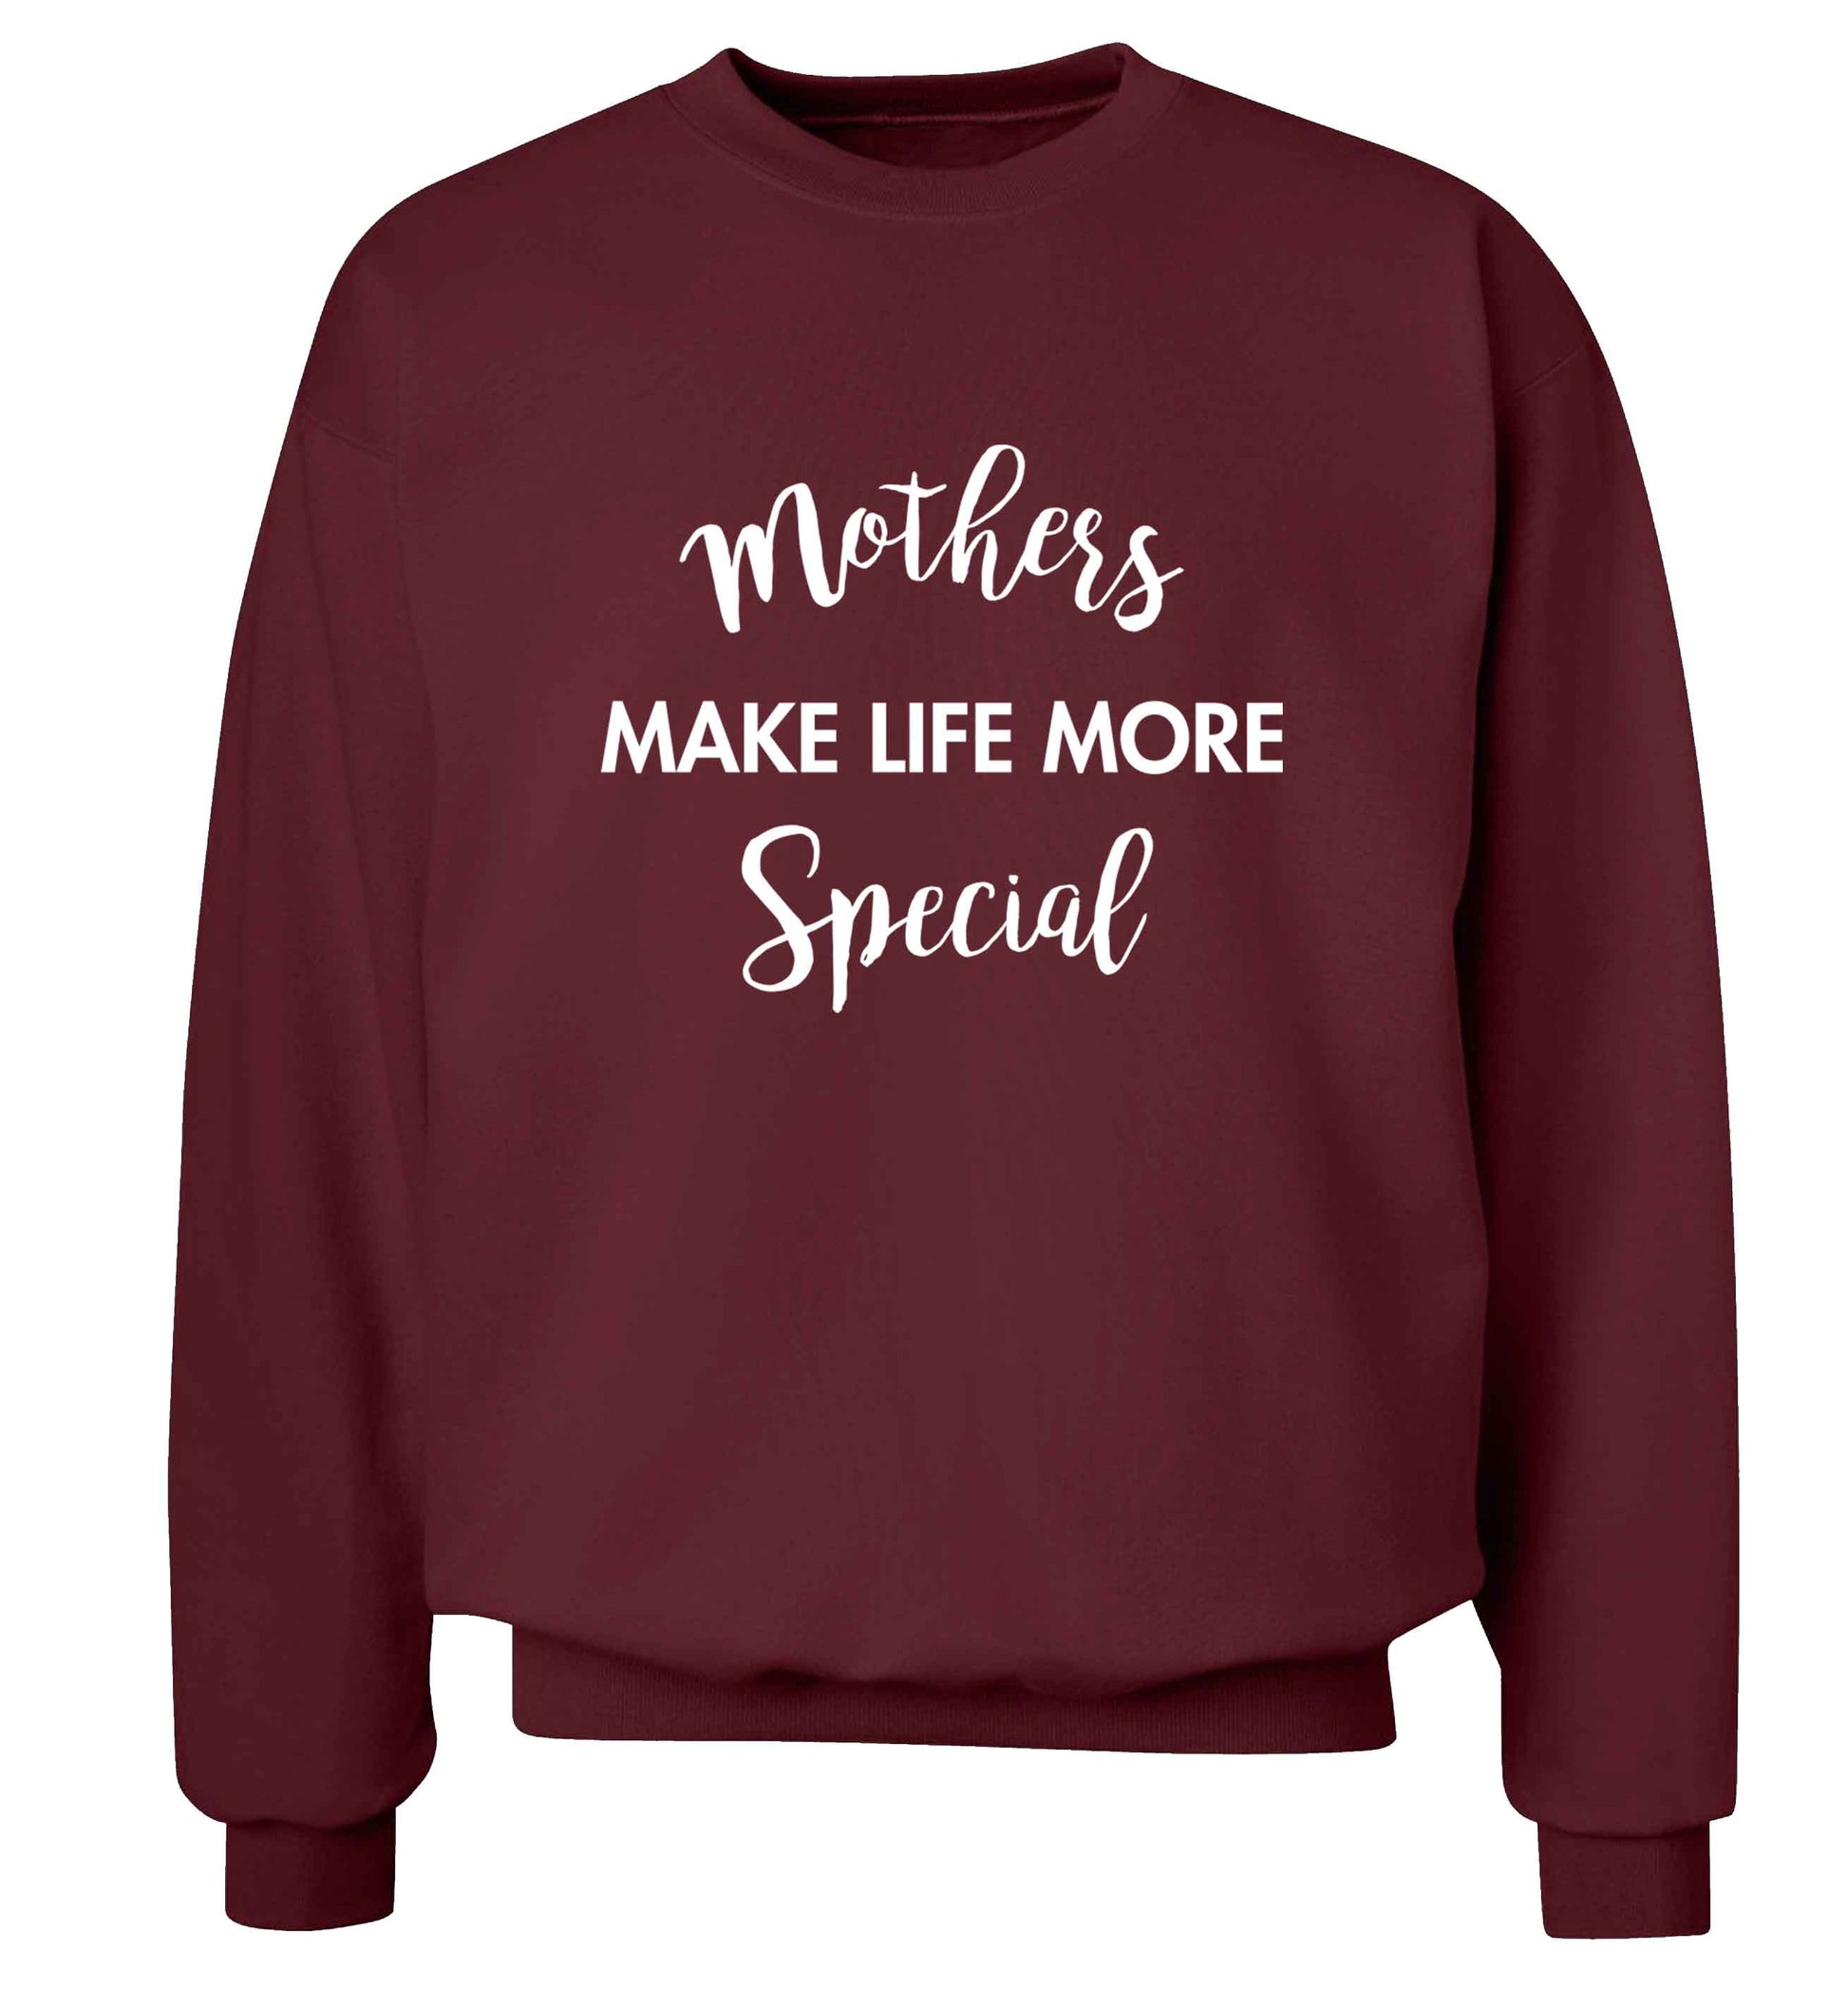 Mother's make life more special adult's unisex maroon sweater 2XL